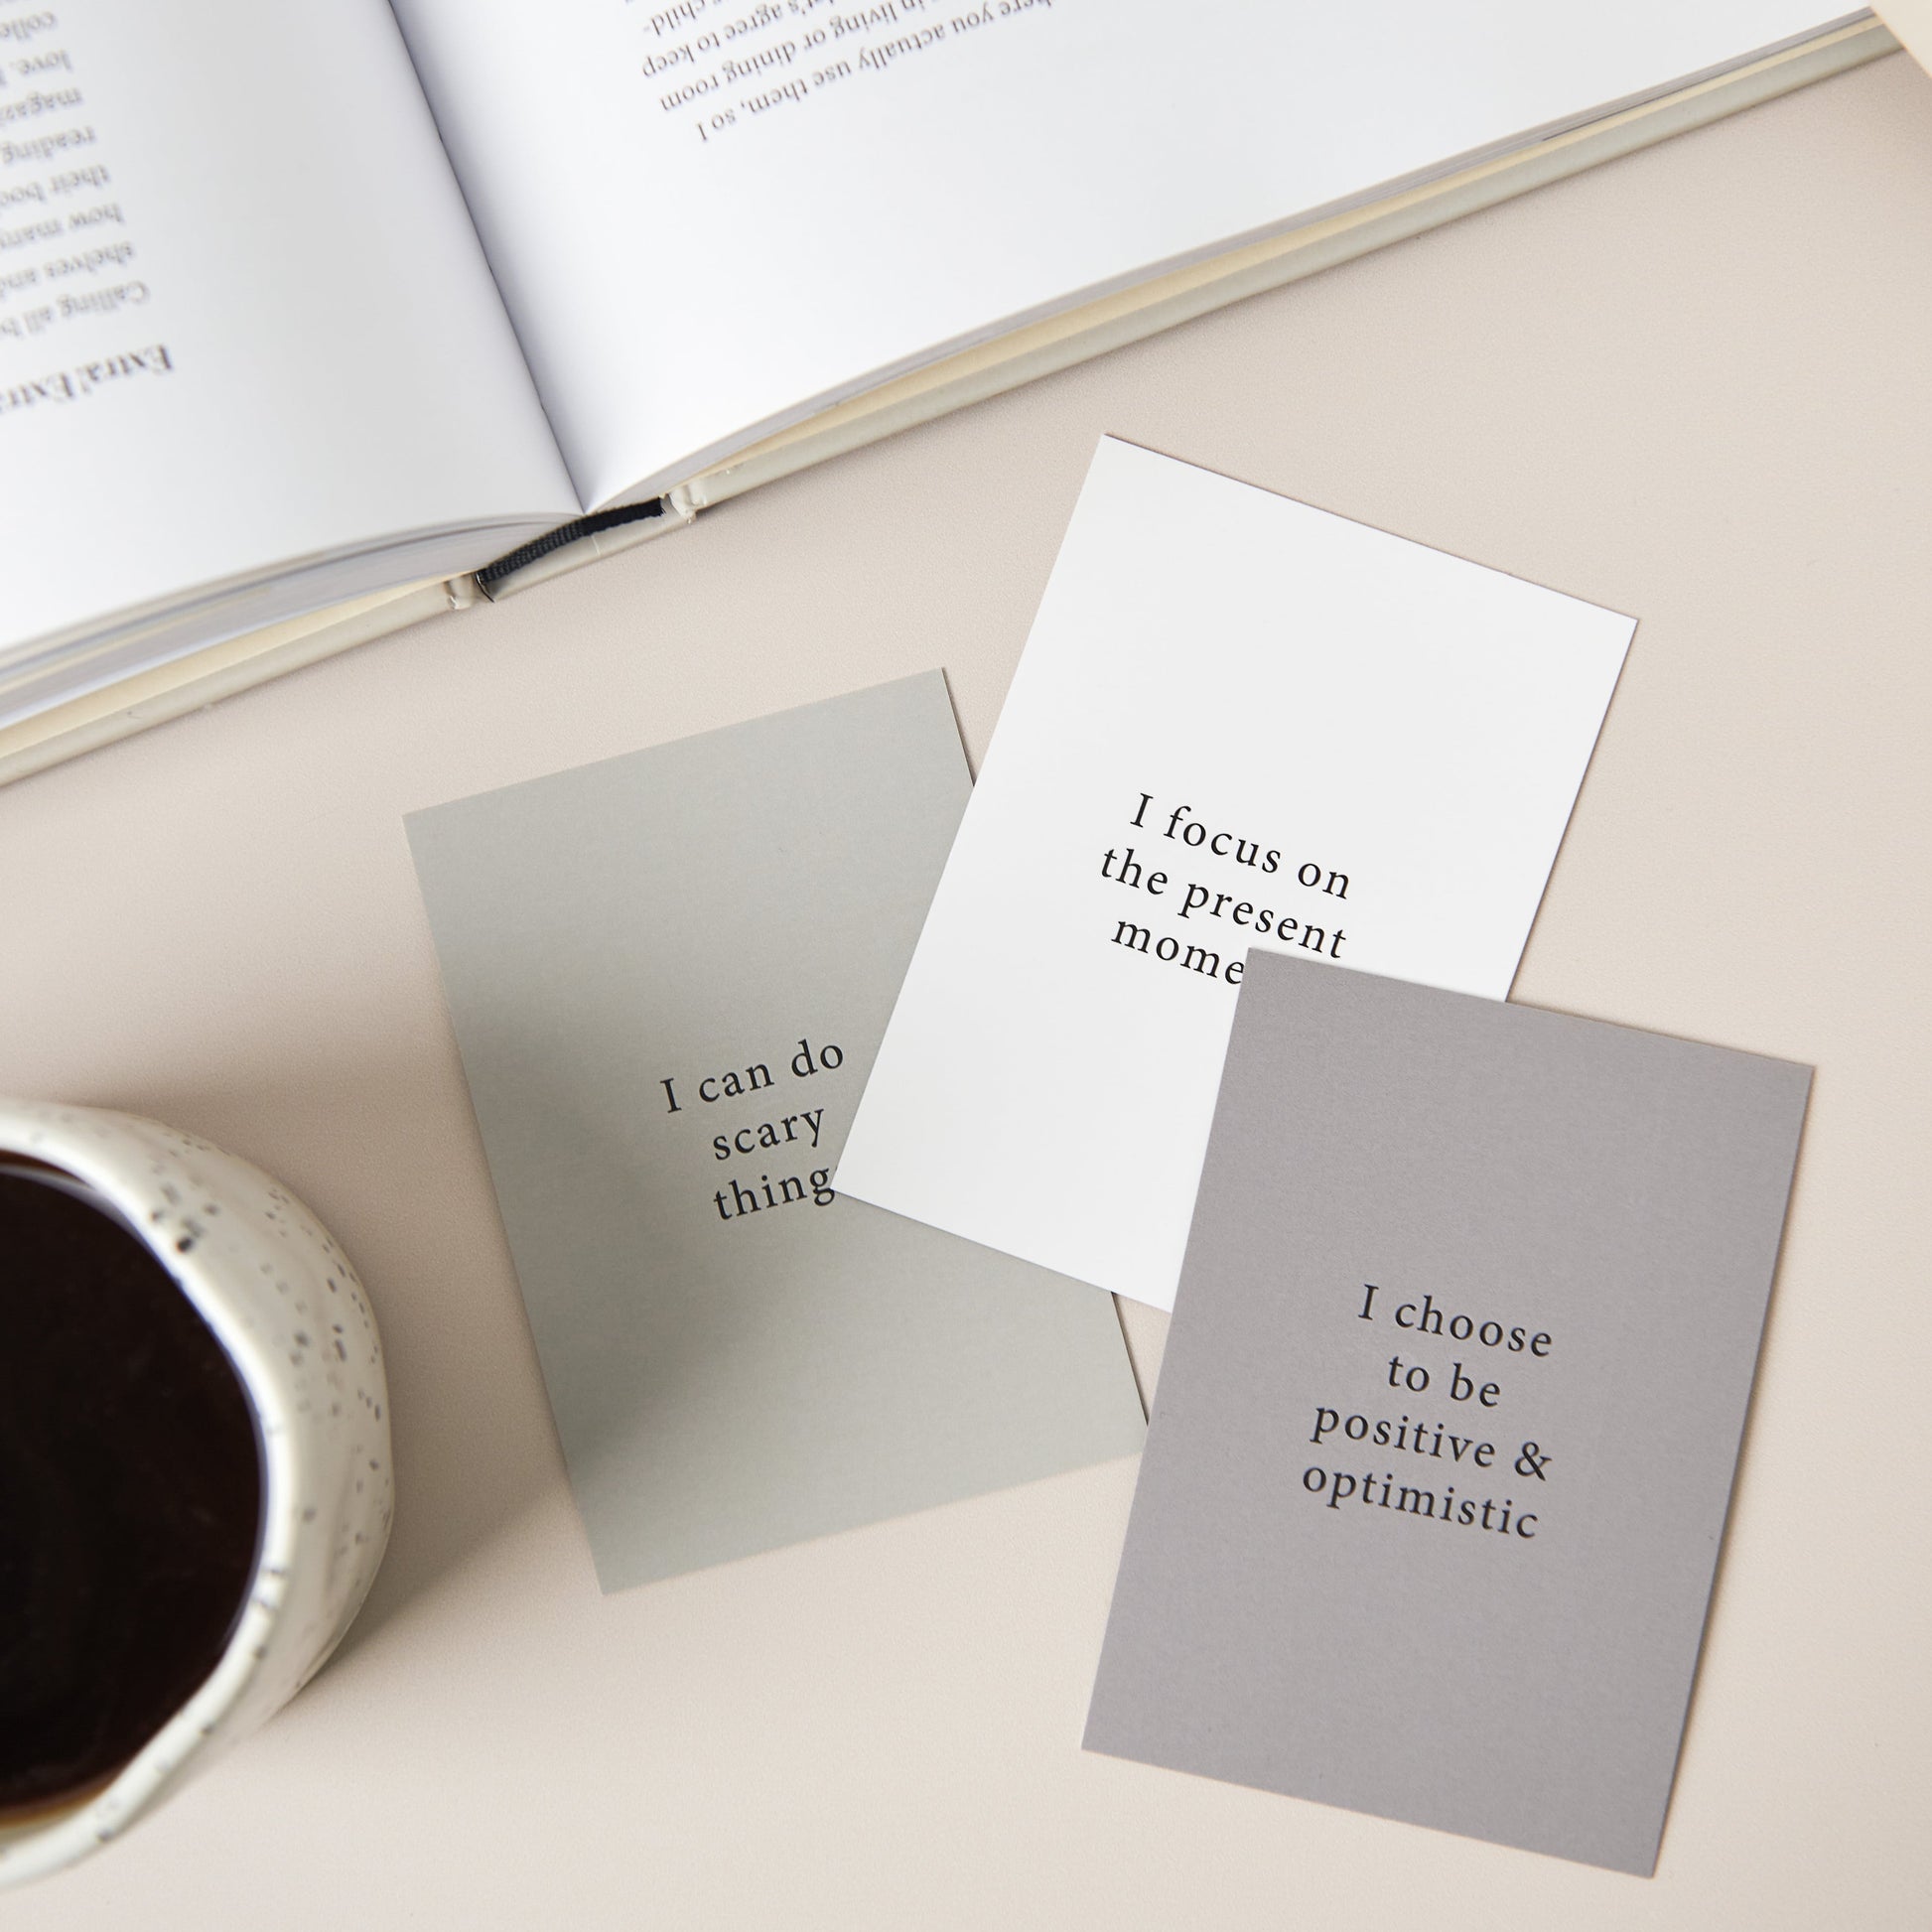 A set of 3 affirmation cards on a table along with a cup of coffee